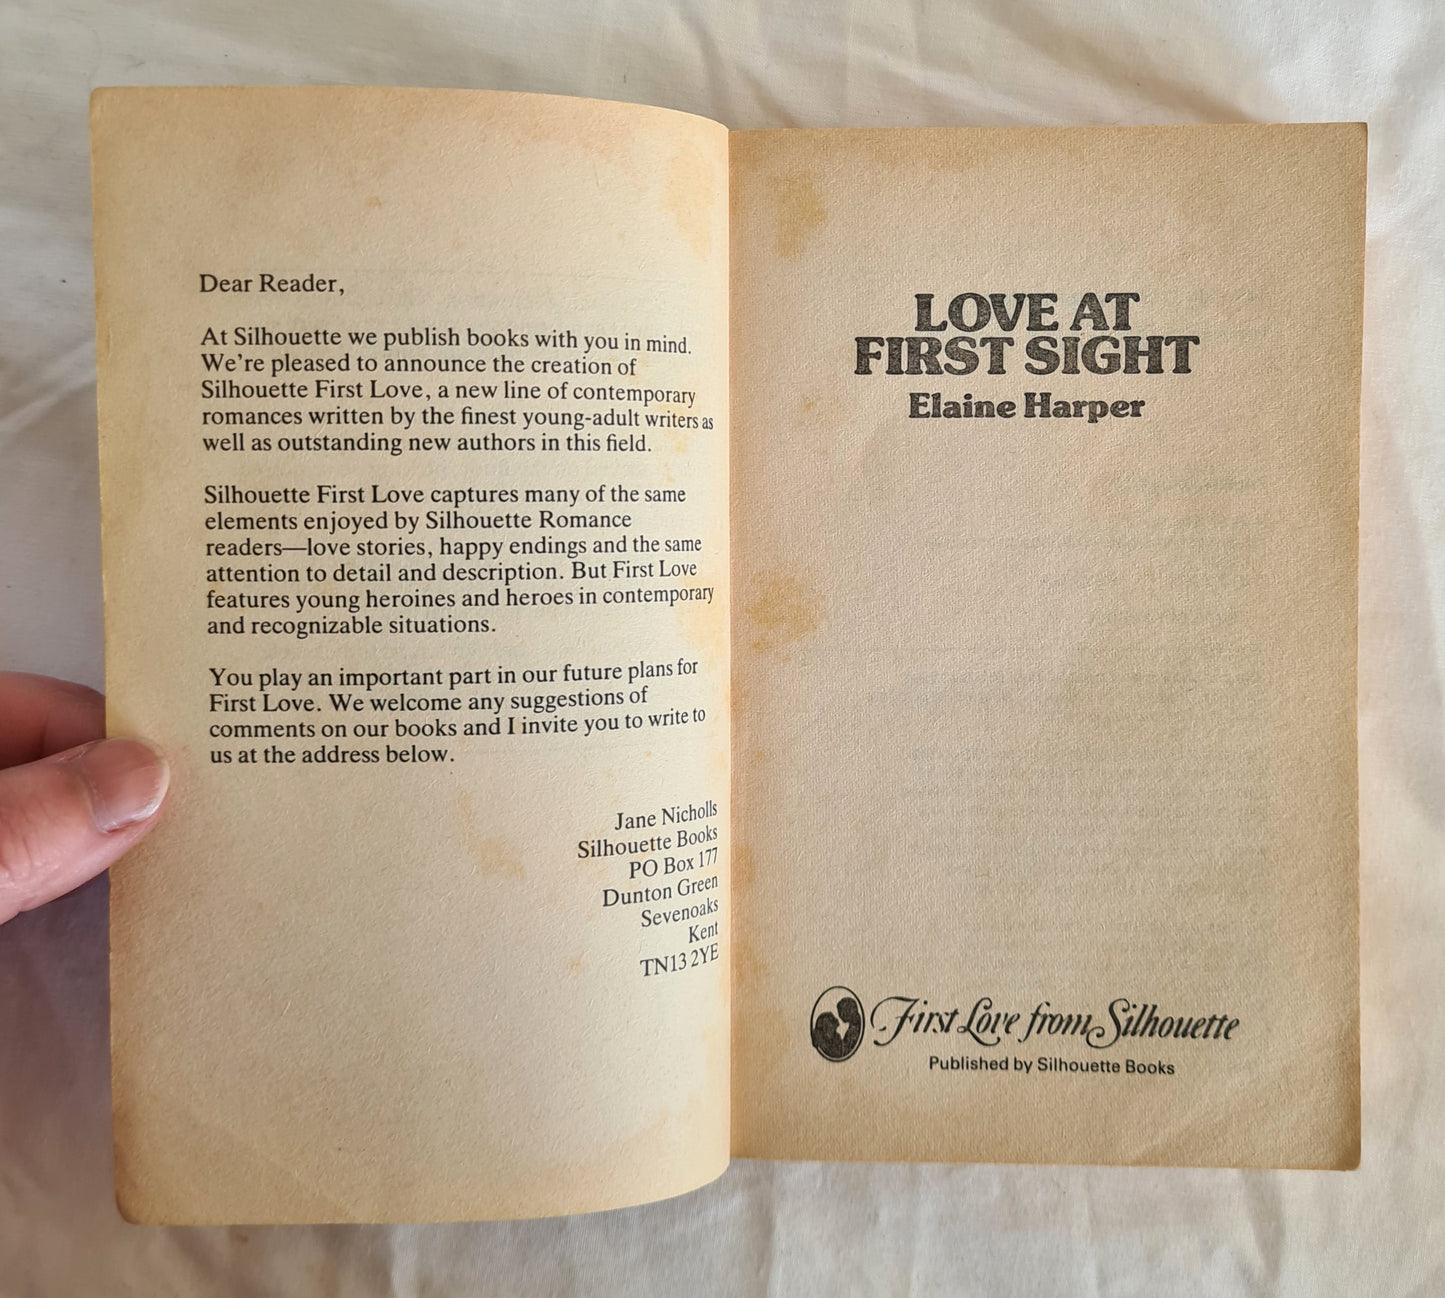 Love at First Sight by Elaine Harper